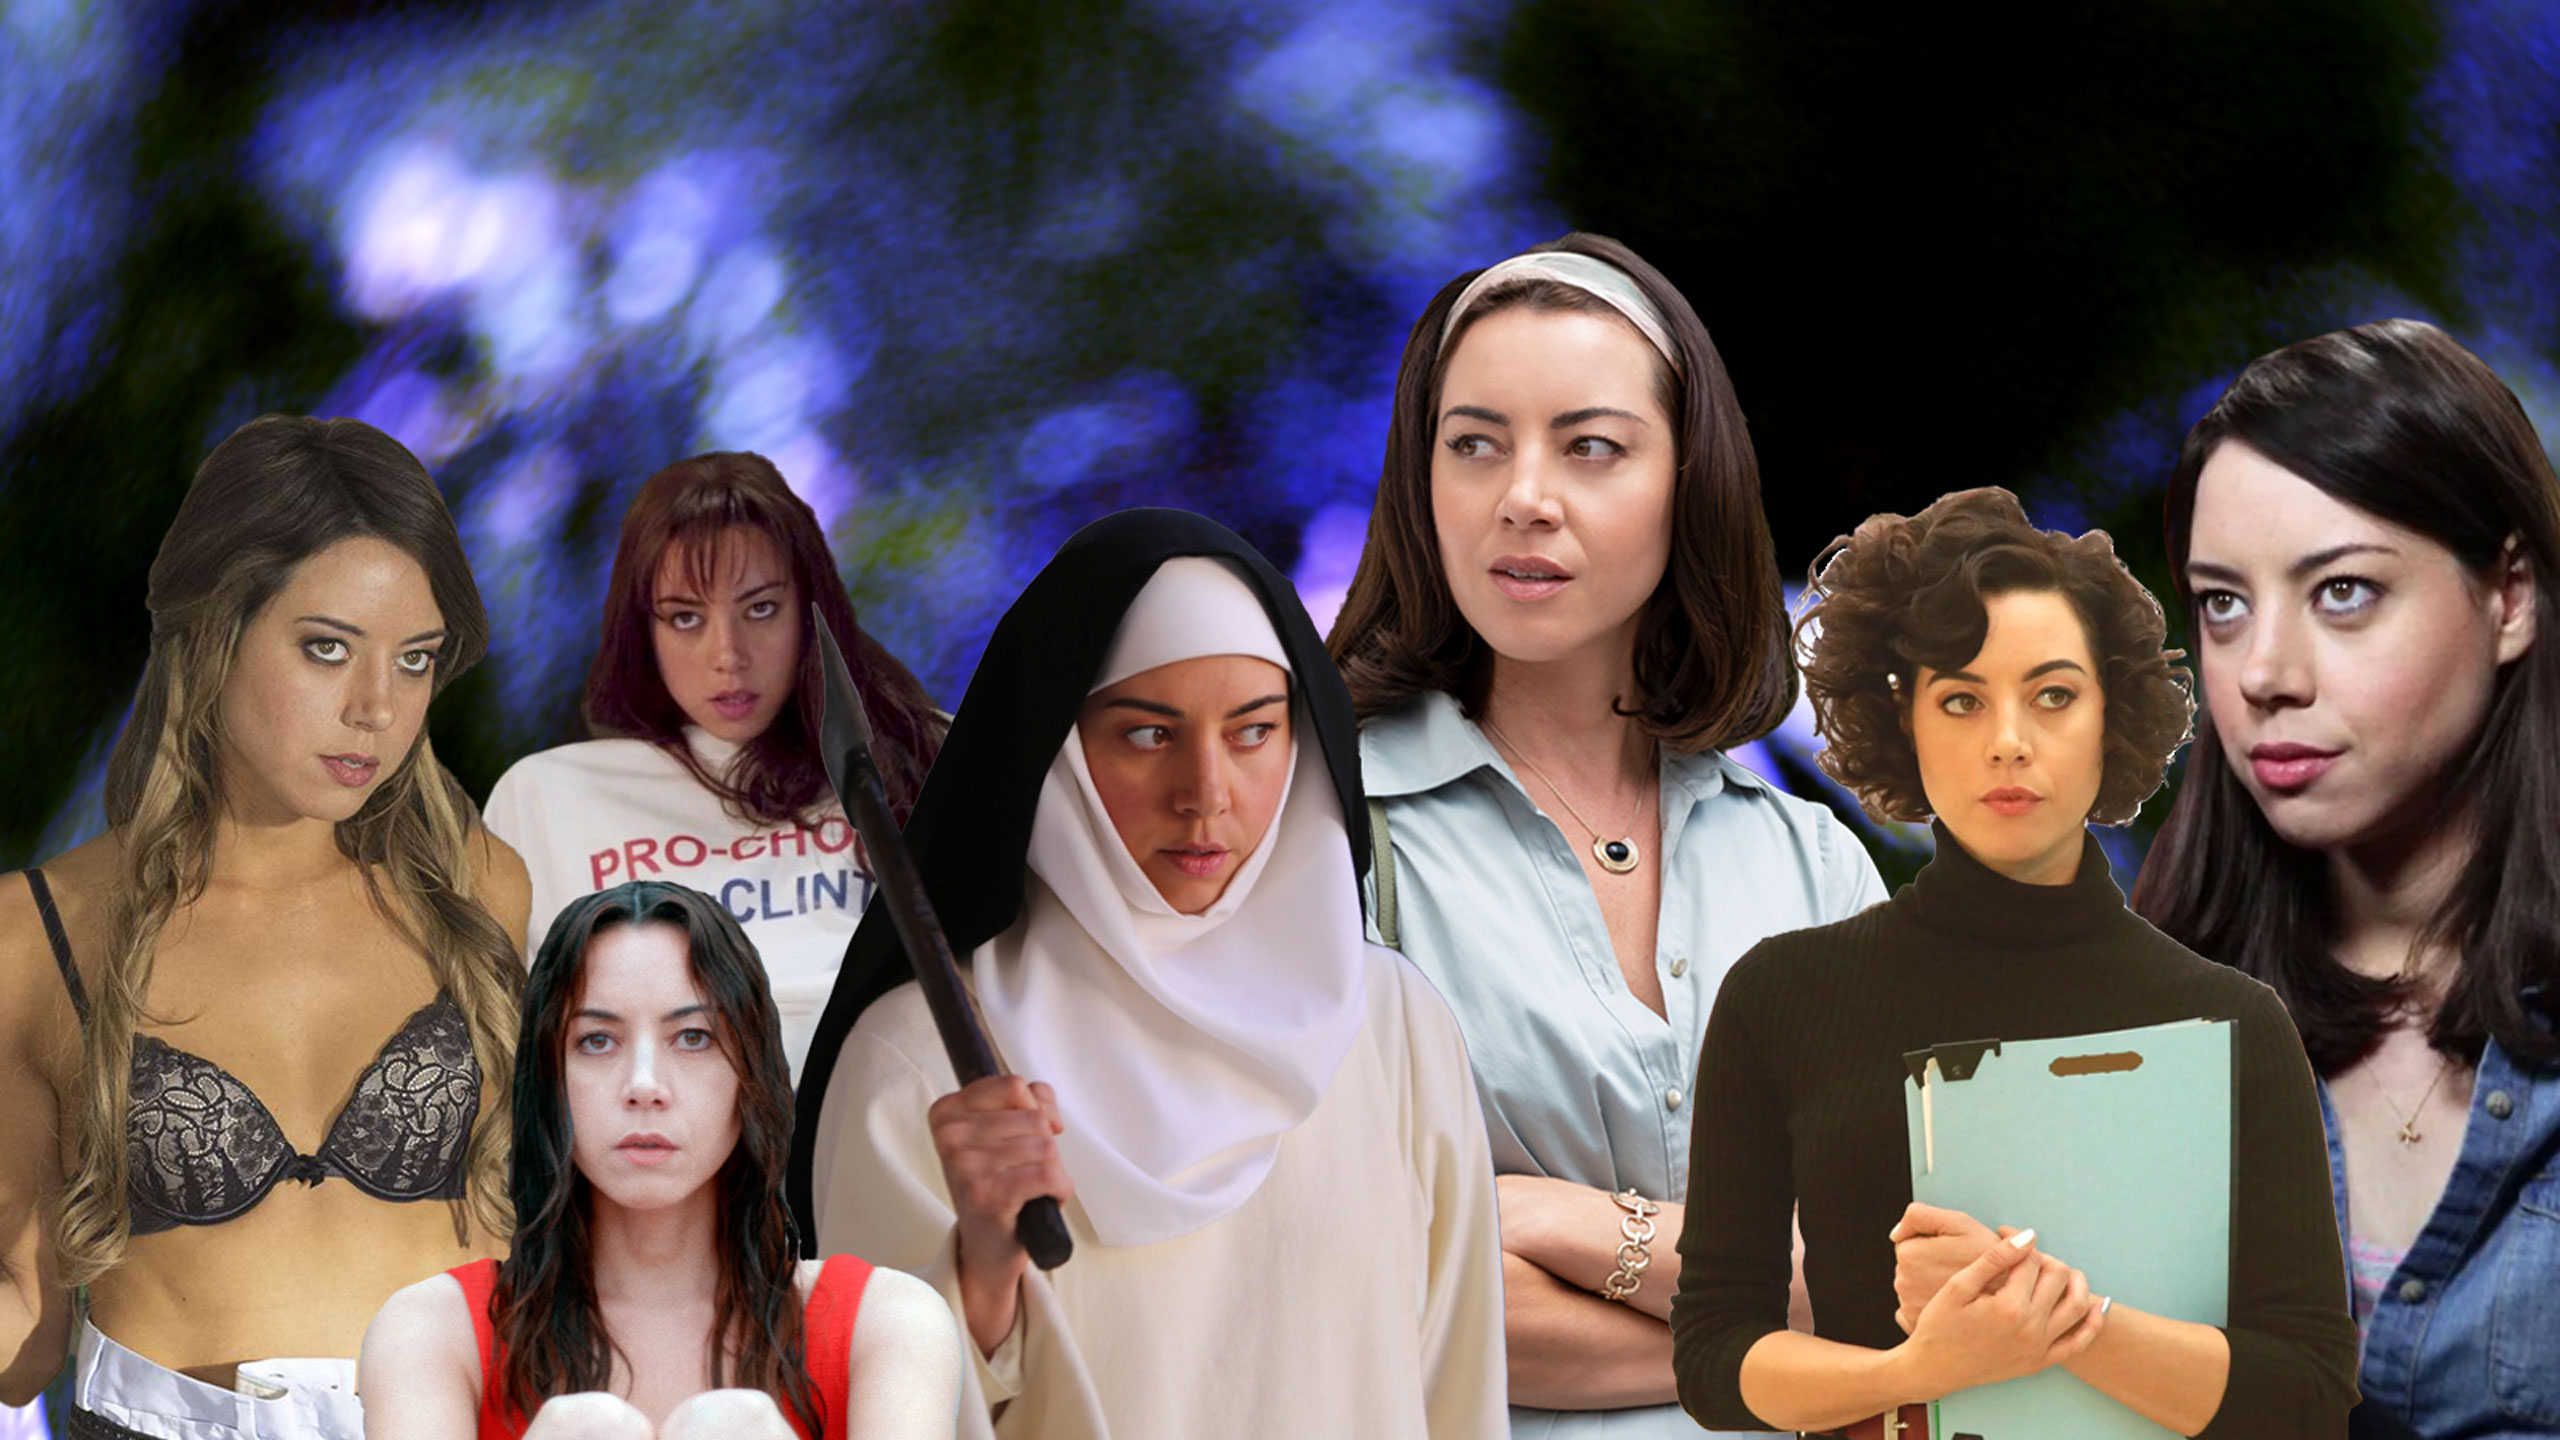 Aubrey Plaza: The White Lotus, Emily the Criminal actress is a low